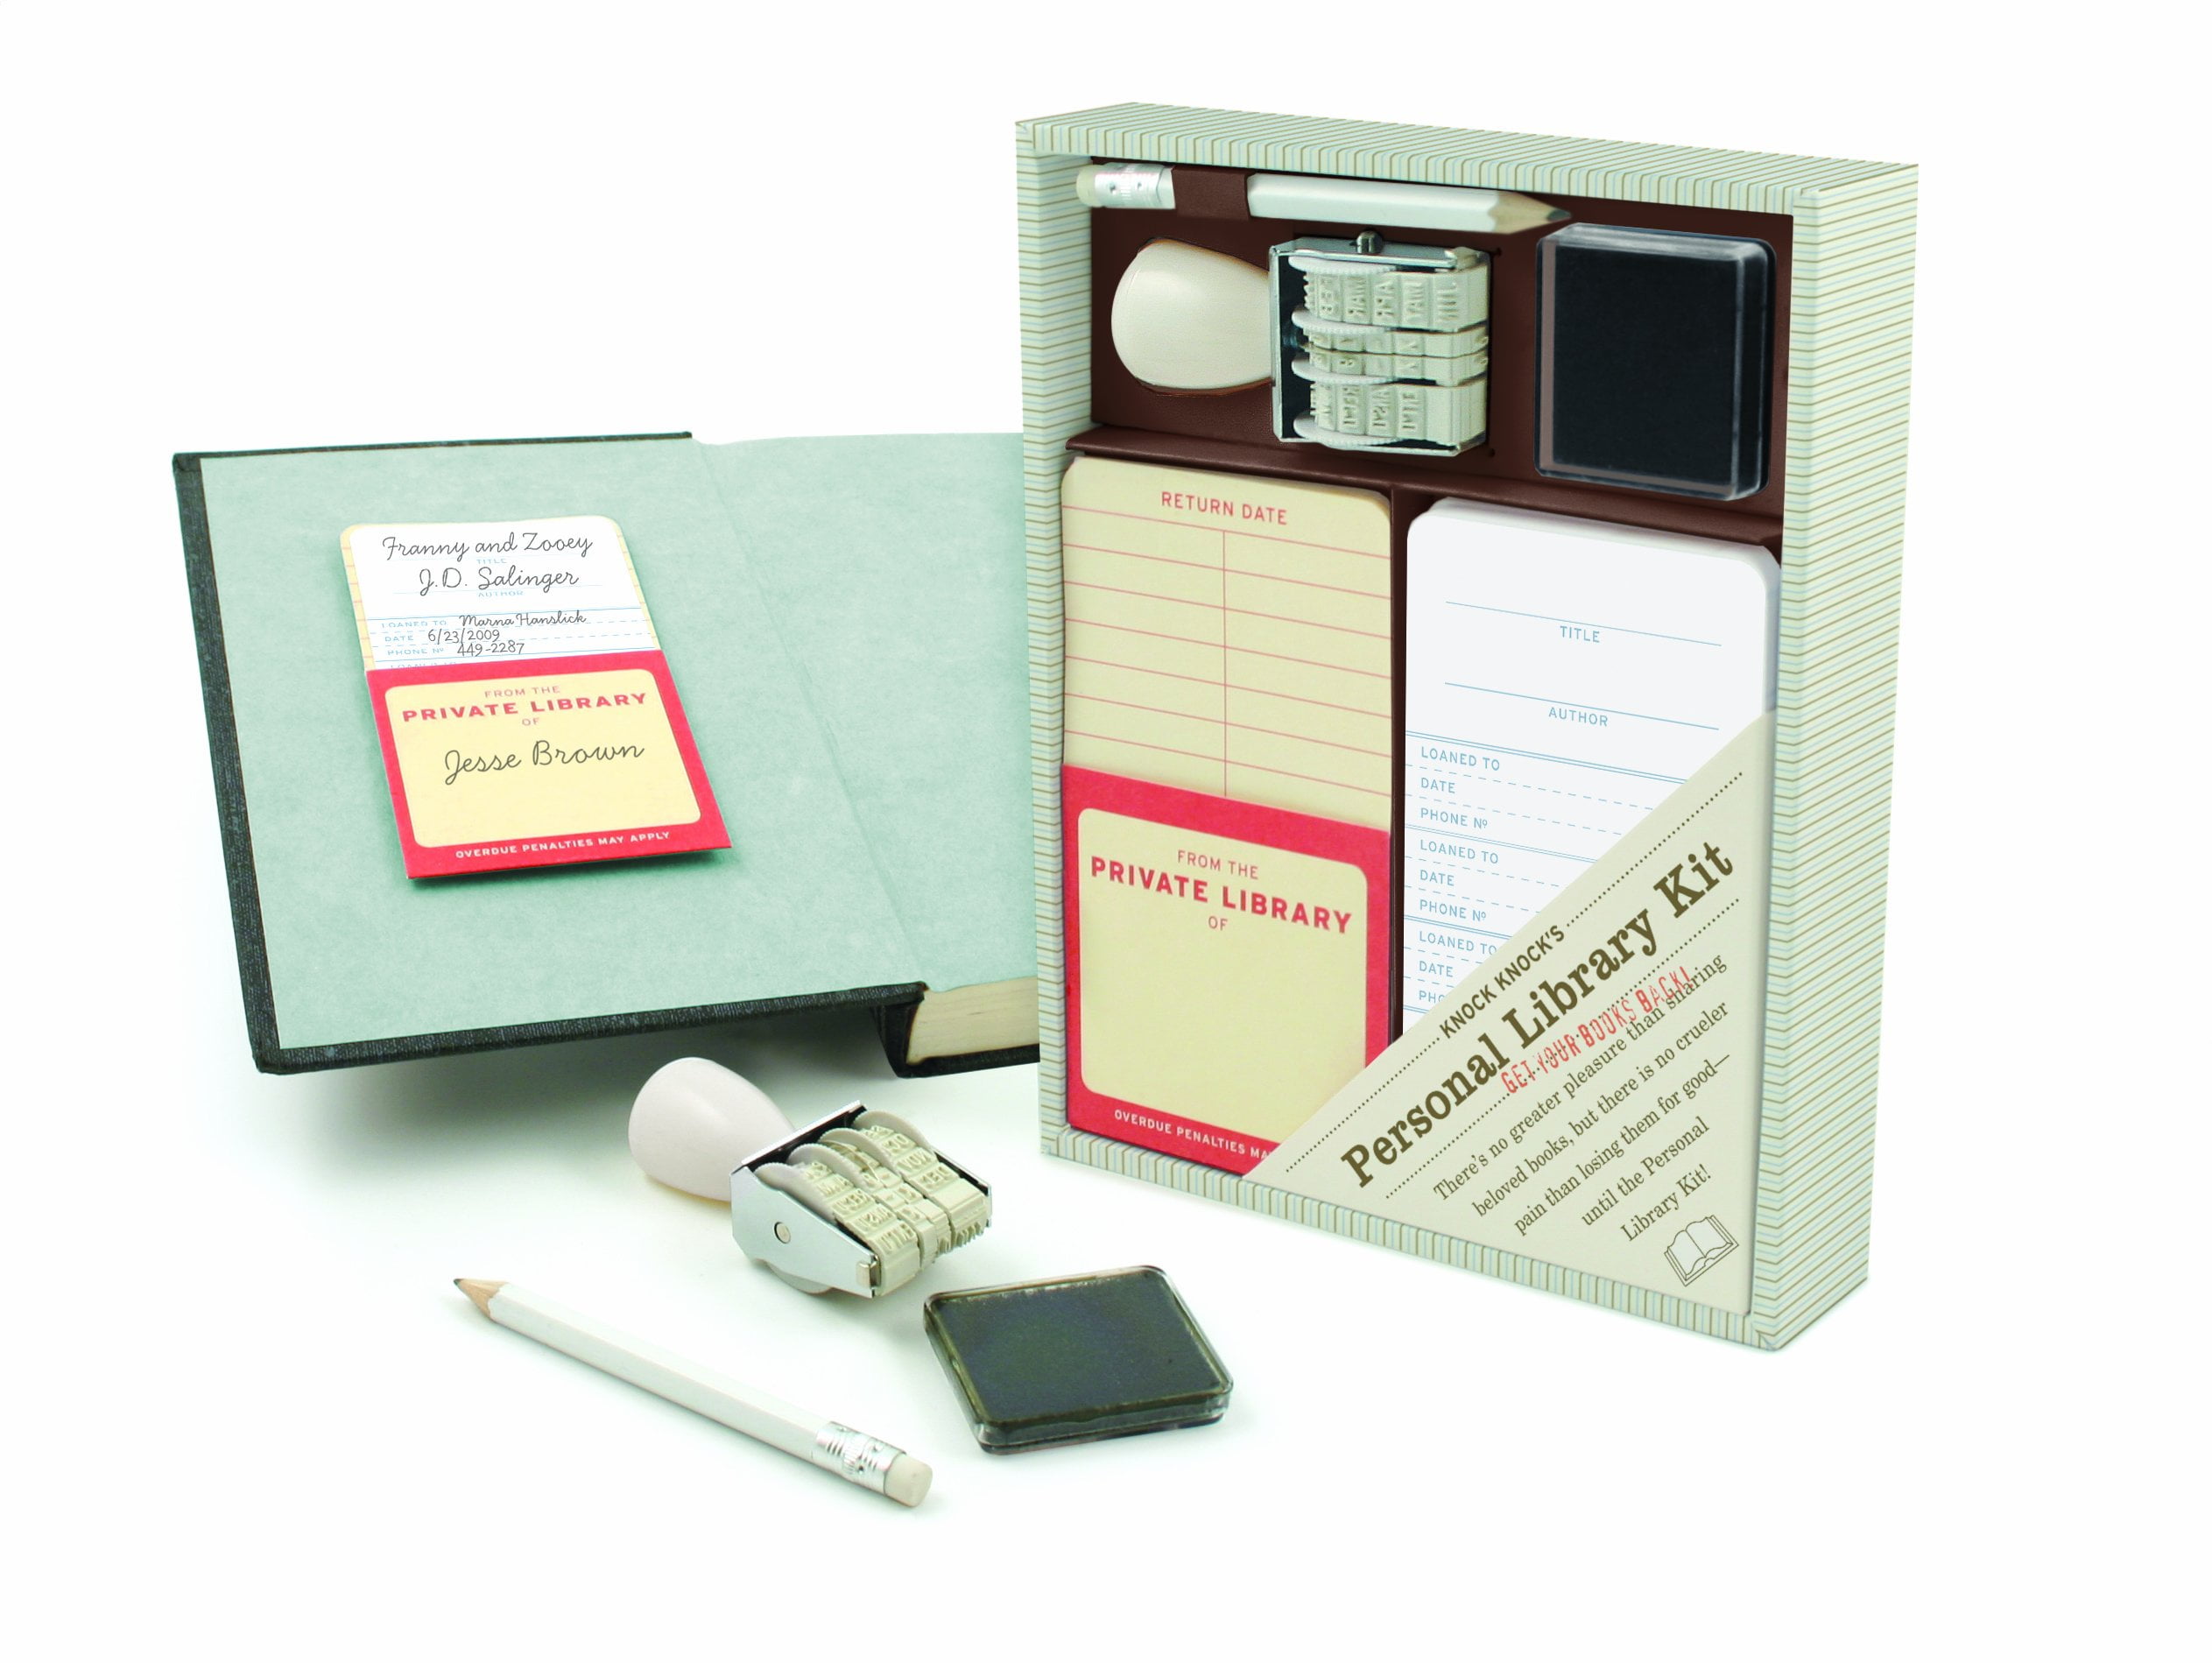  Knock Knock Personal Library Kit Refill : Personal Library Kit  : Office Products